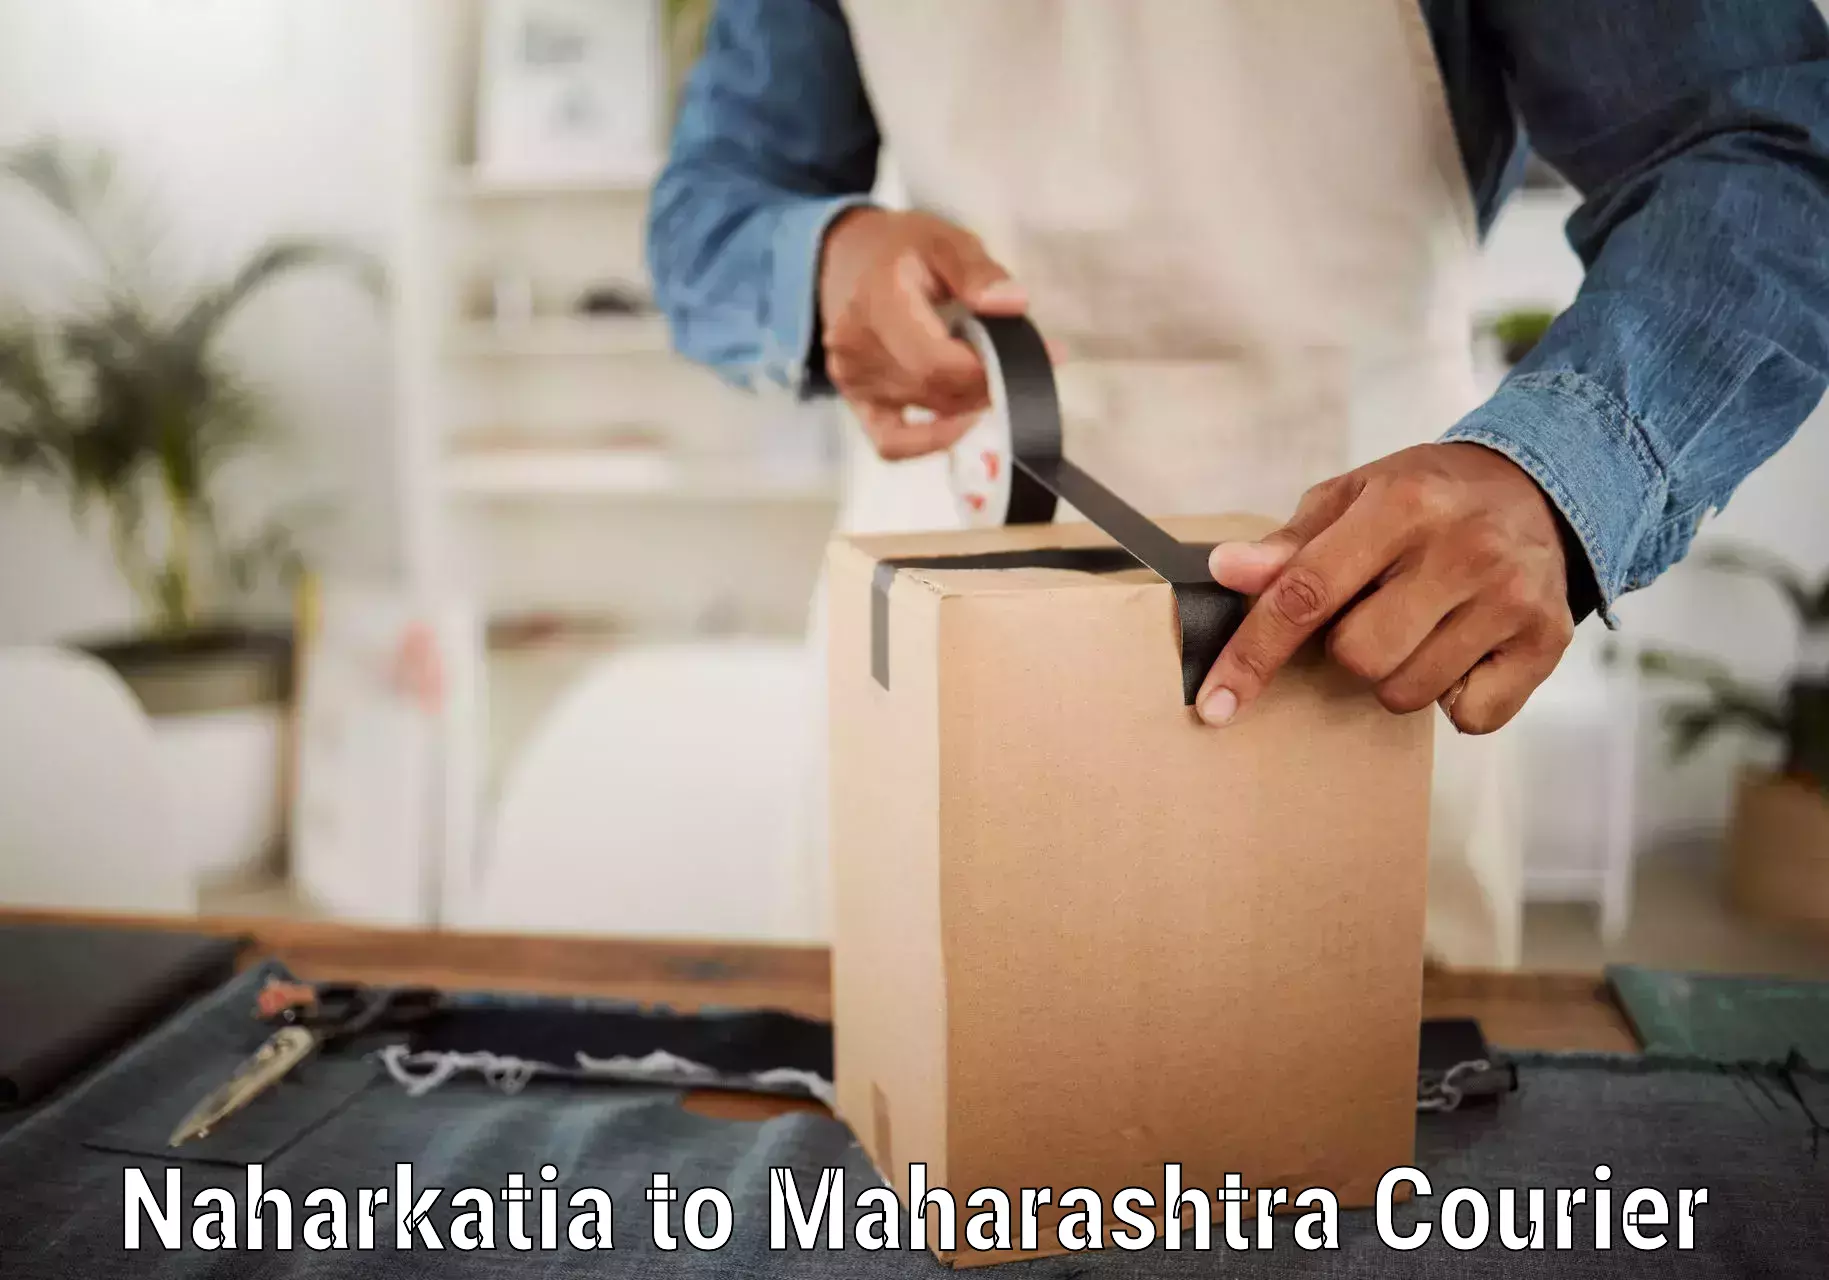 Parcel service for businesses Naharkatia to IIIT Pune